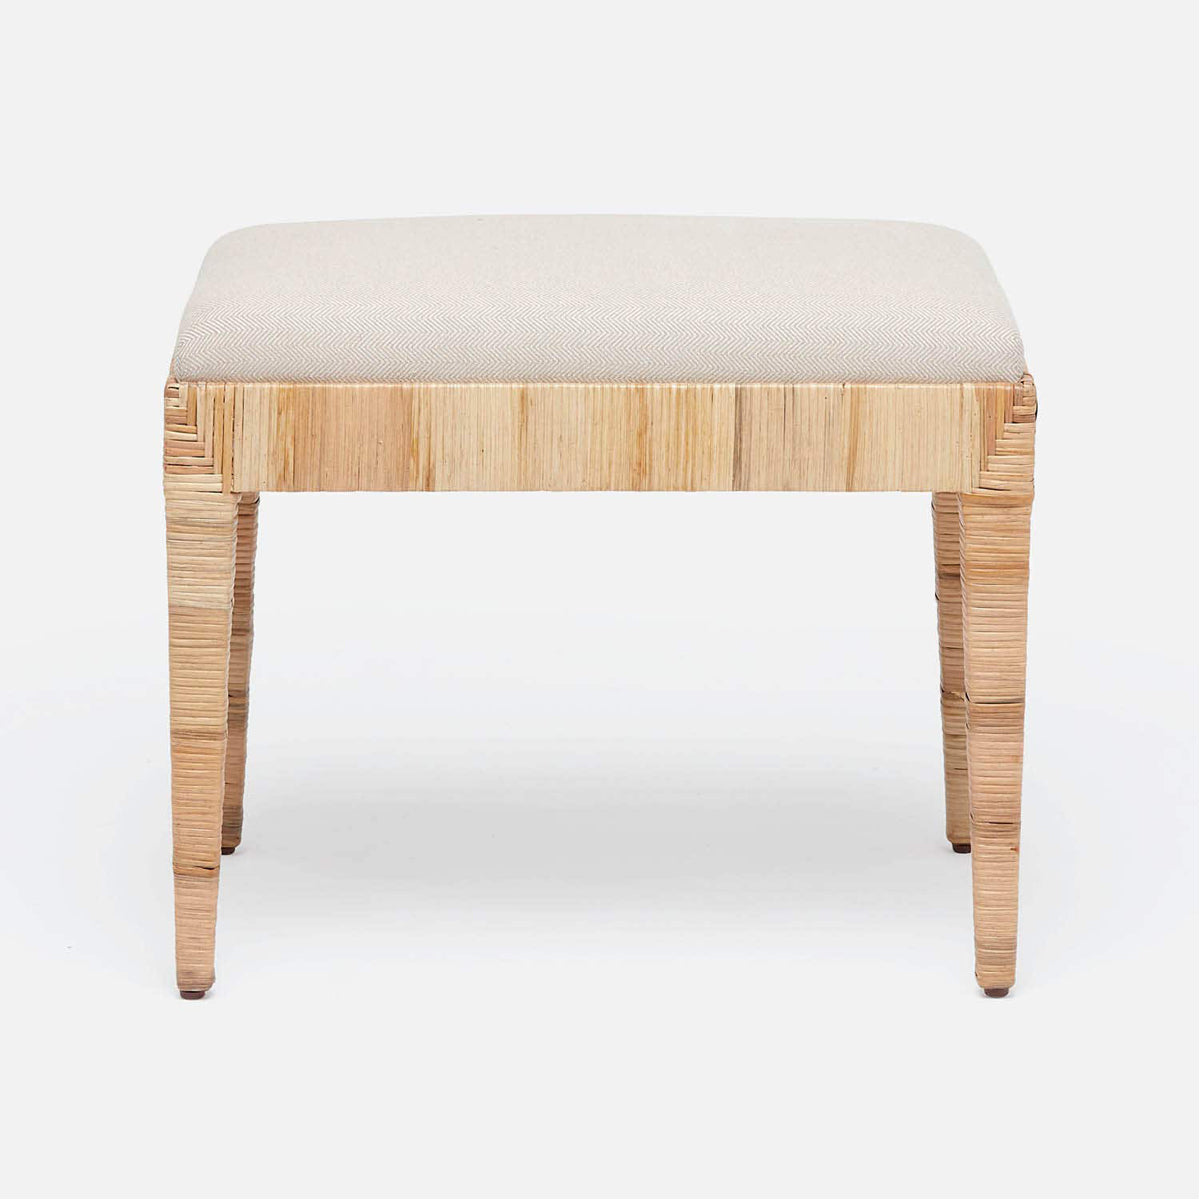 Made Goods Wren Upholstered Rattan Single Bench in Pagua Fabric